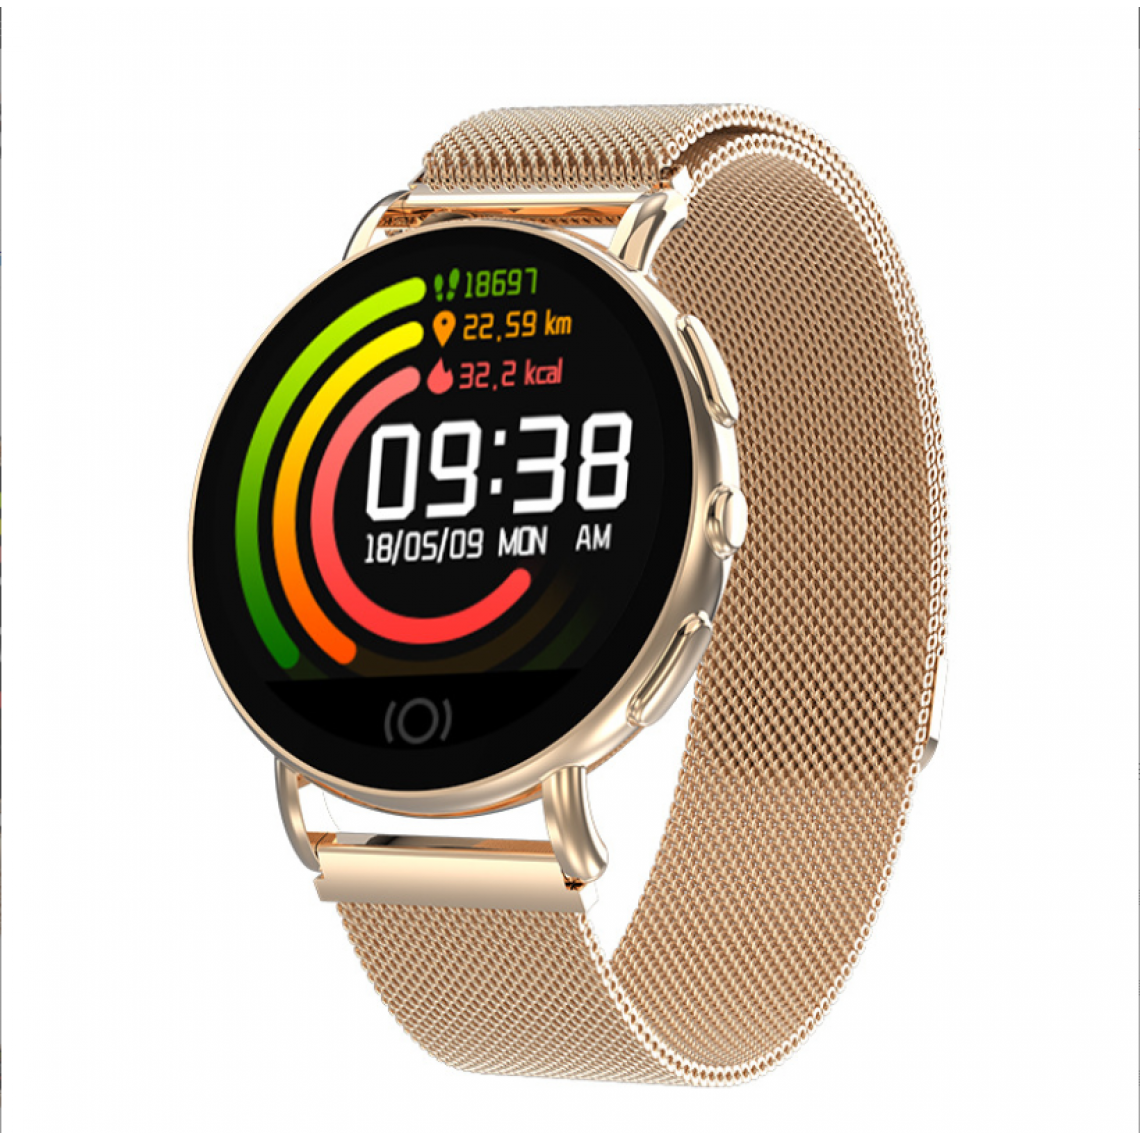 Chronotech Montres - Chronus Smart Watch 1.22 Inch Round Screen Metal Wristband Men's and Women's with Heart Rateï¼goldï¼ - Montre connectée